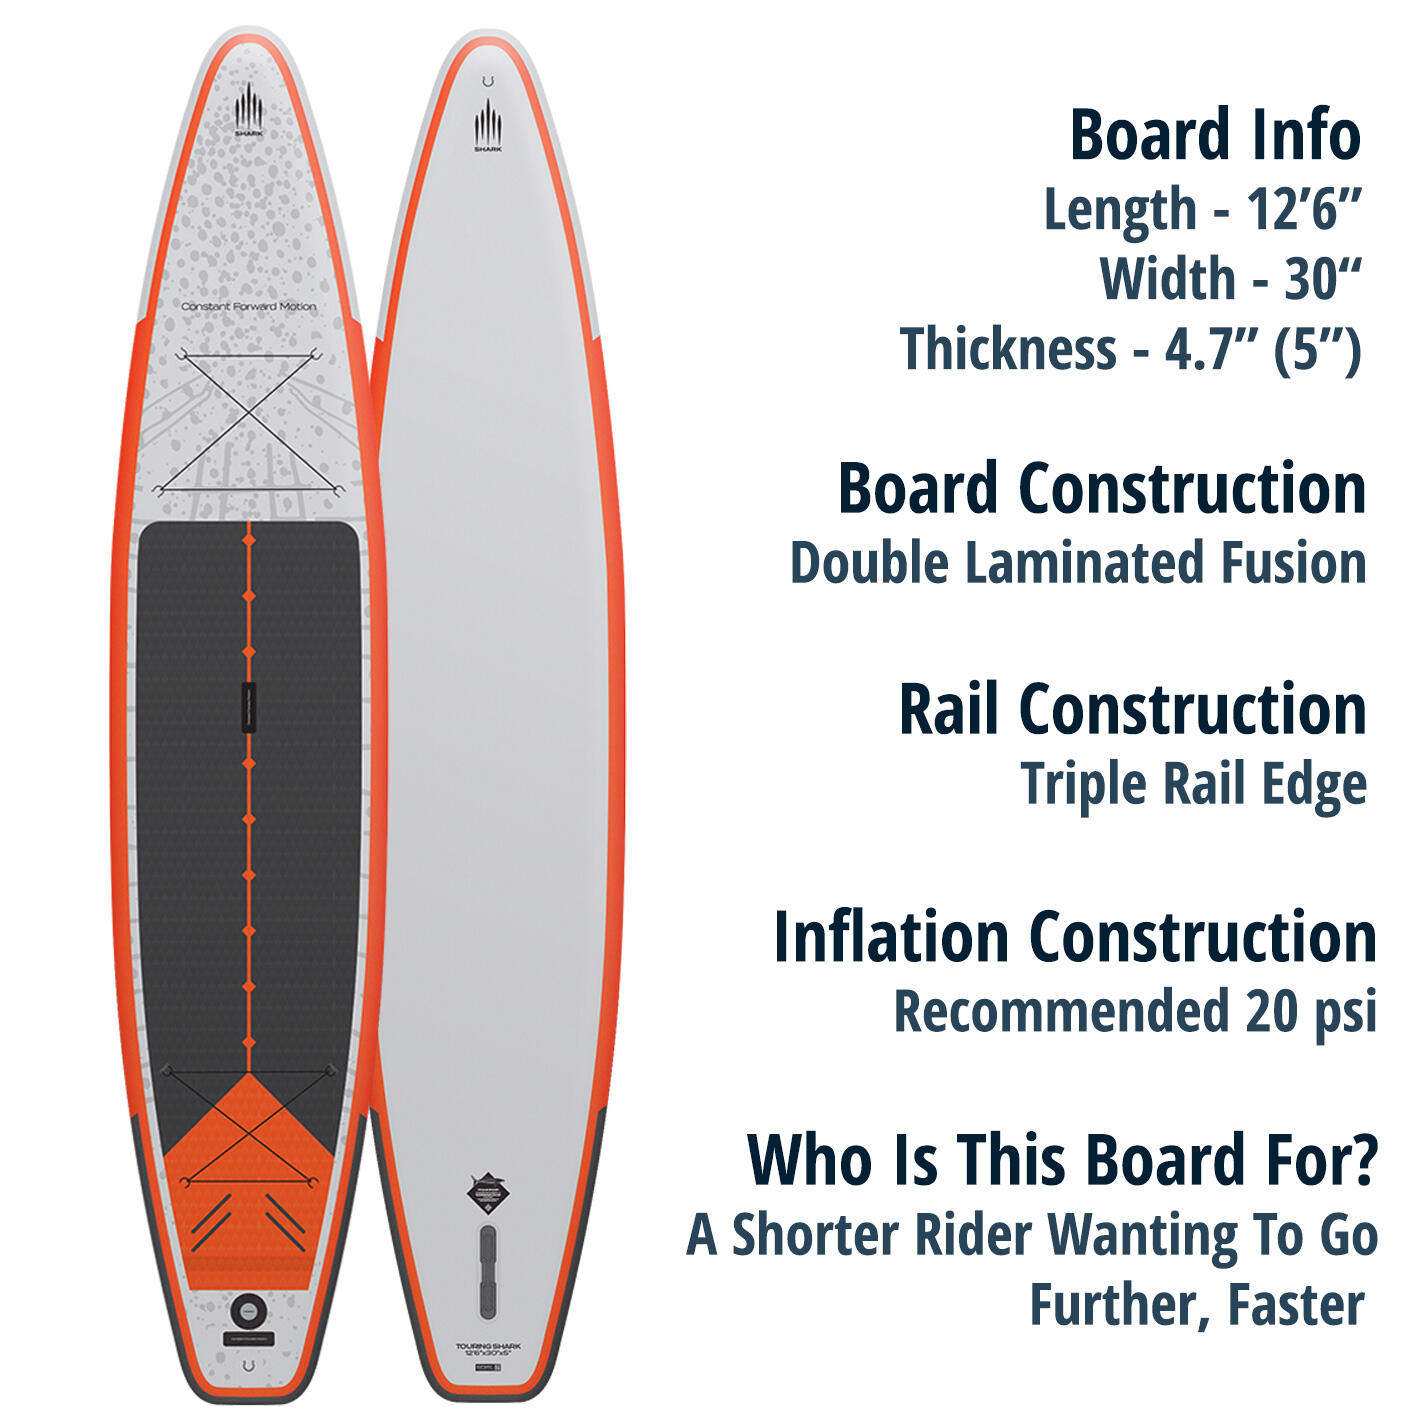 SHARK TOURING 12'6 x 30" x 5" FOR LIGHTER RIDERS 2/7